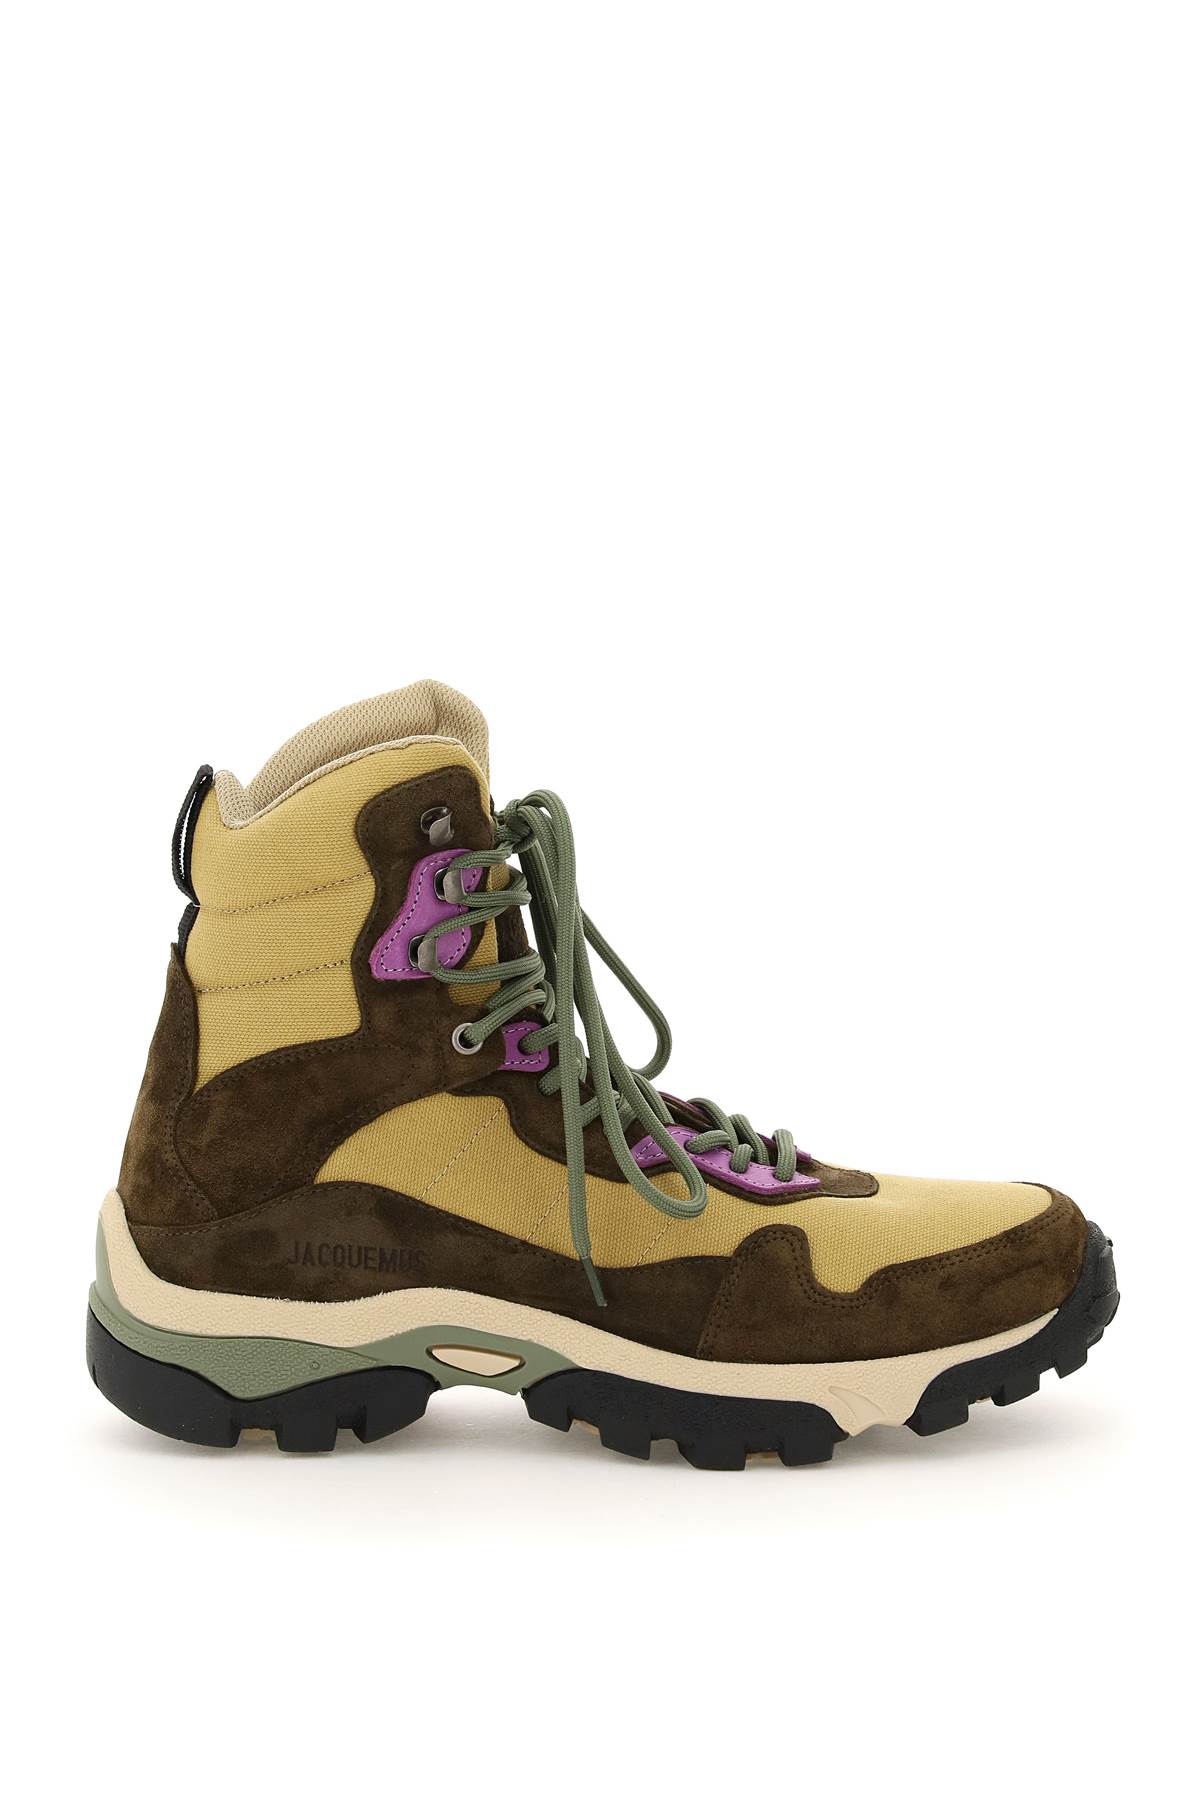 Jacquemus Le Chaussures Terra Hiking Ankle Boots